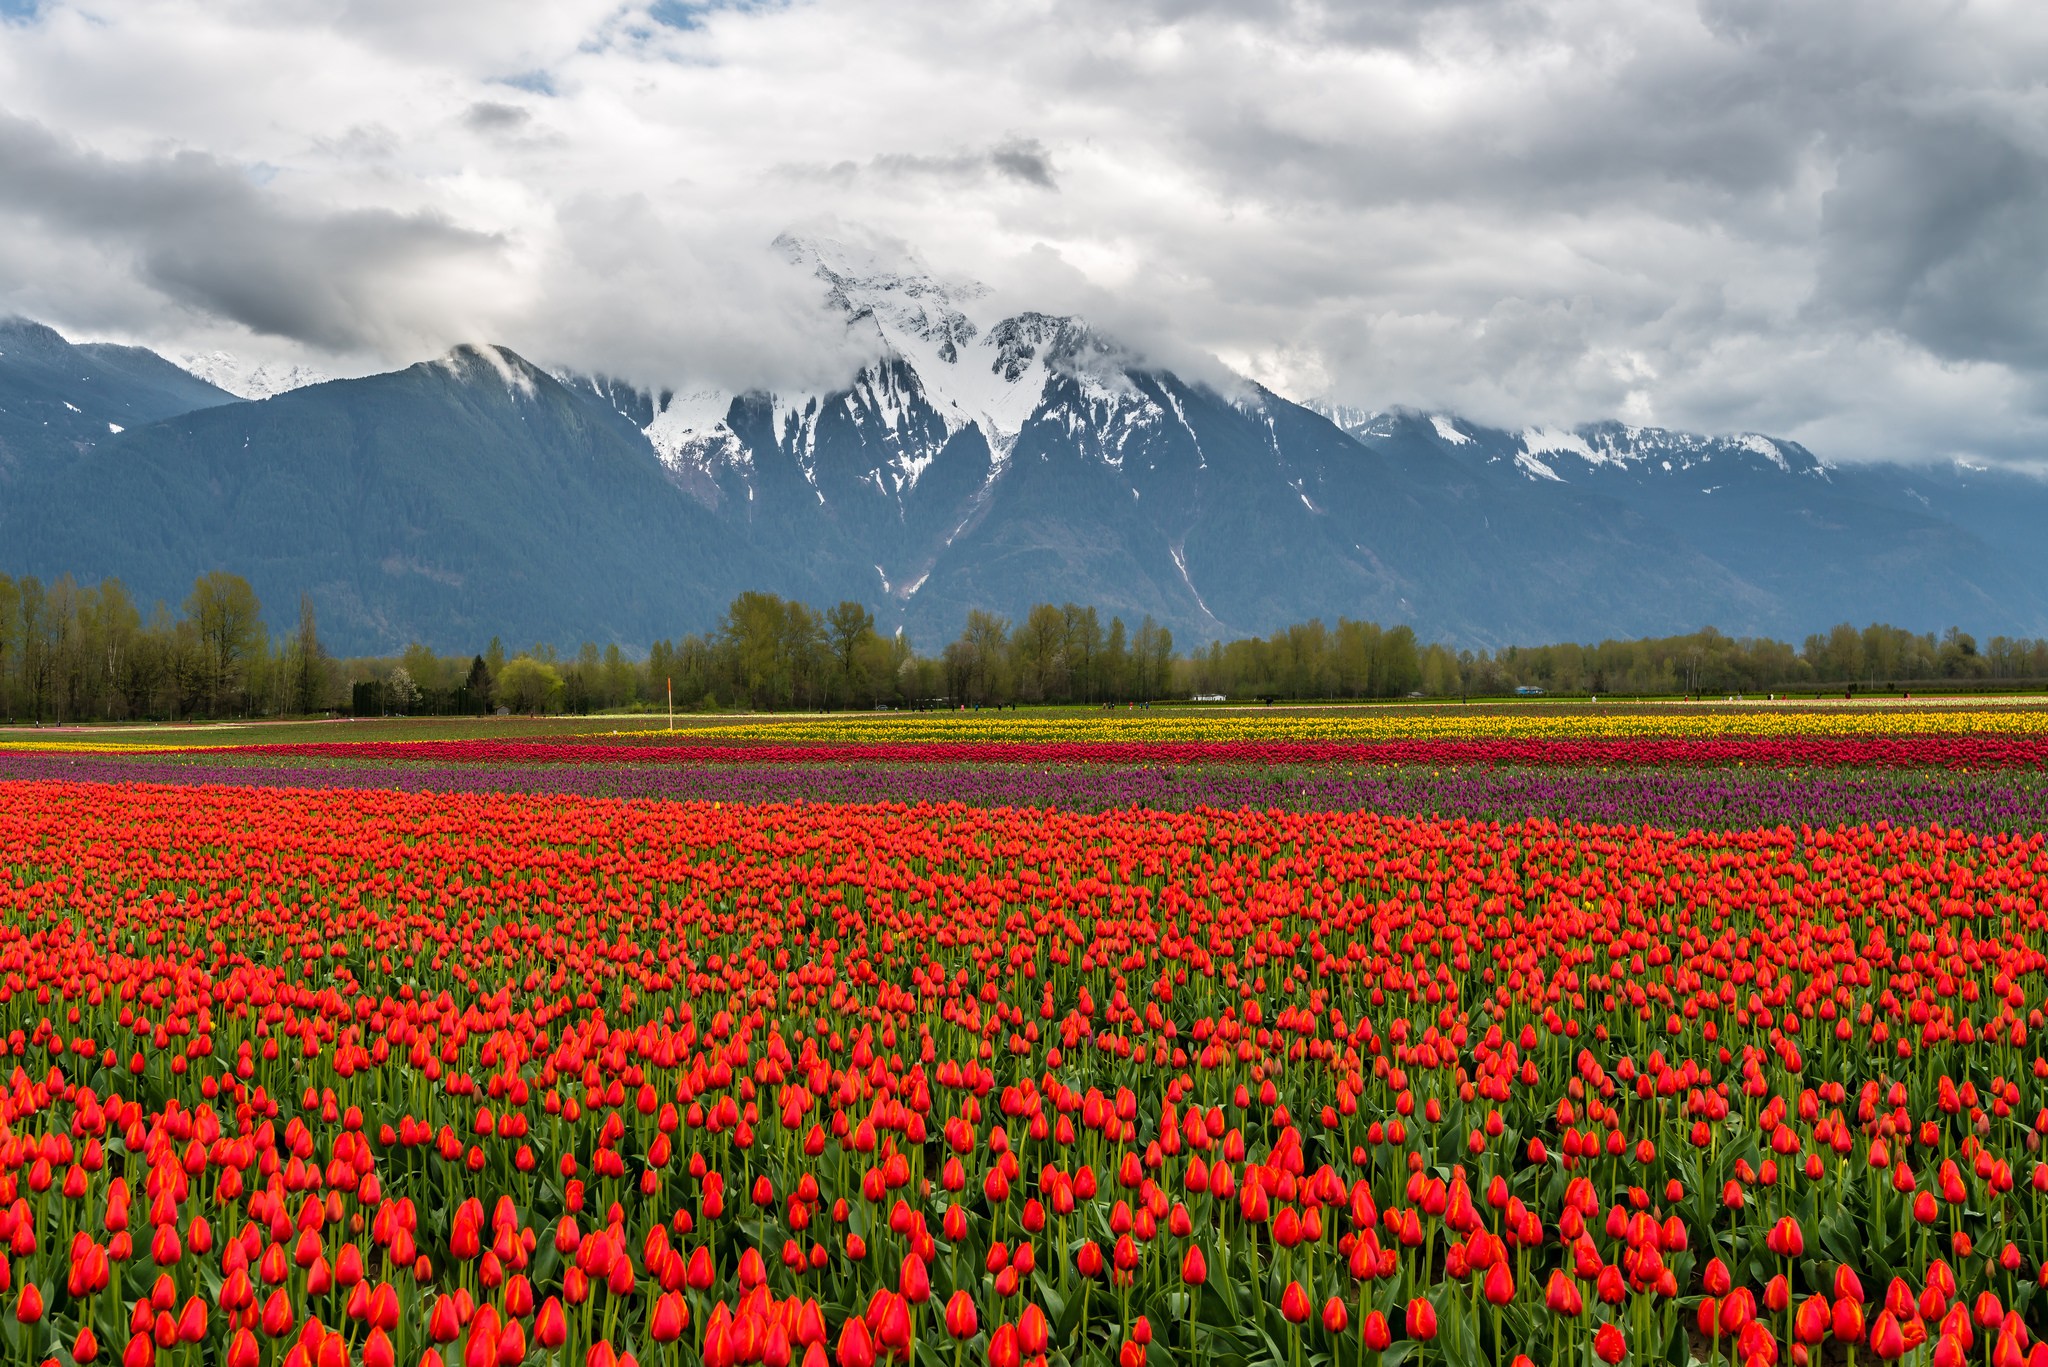 General 2048x1367 landscape tulips British Columbia mountains field snowy mountain Agro (Plants) plants